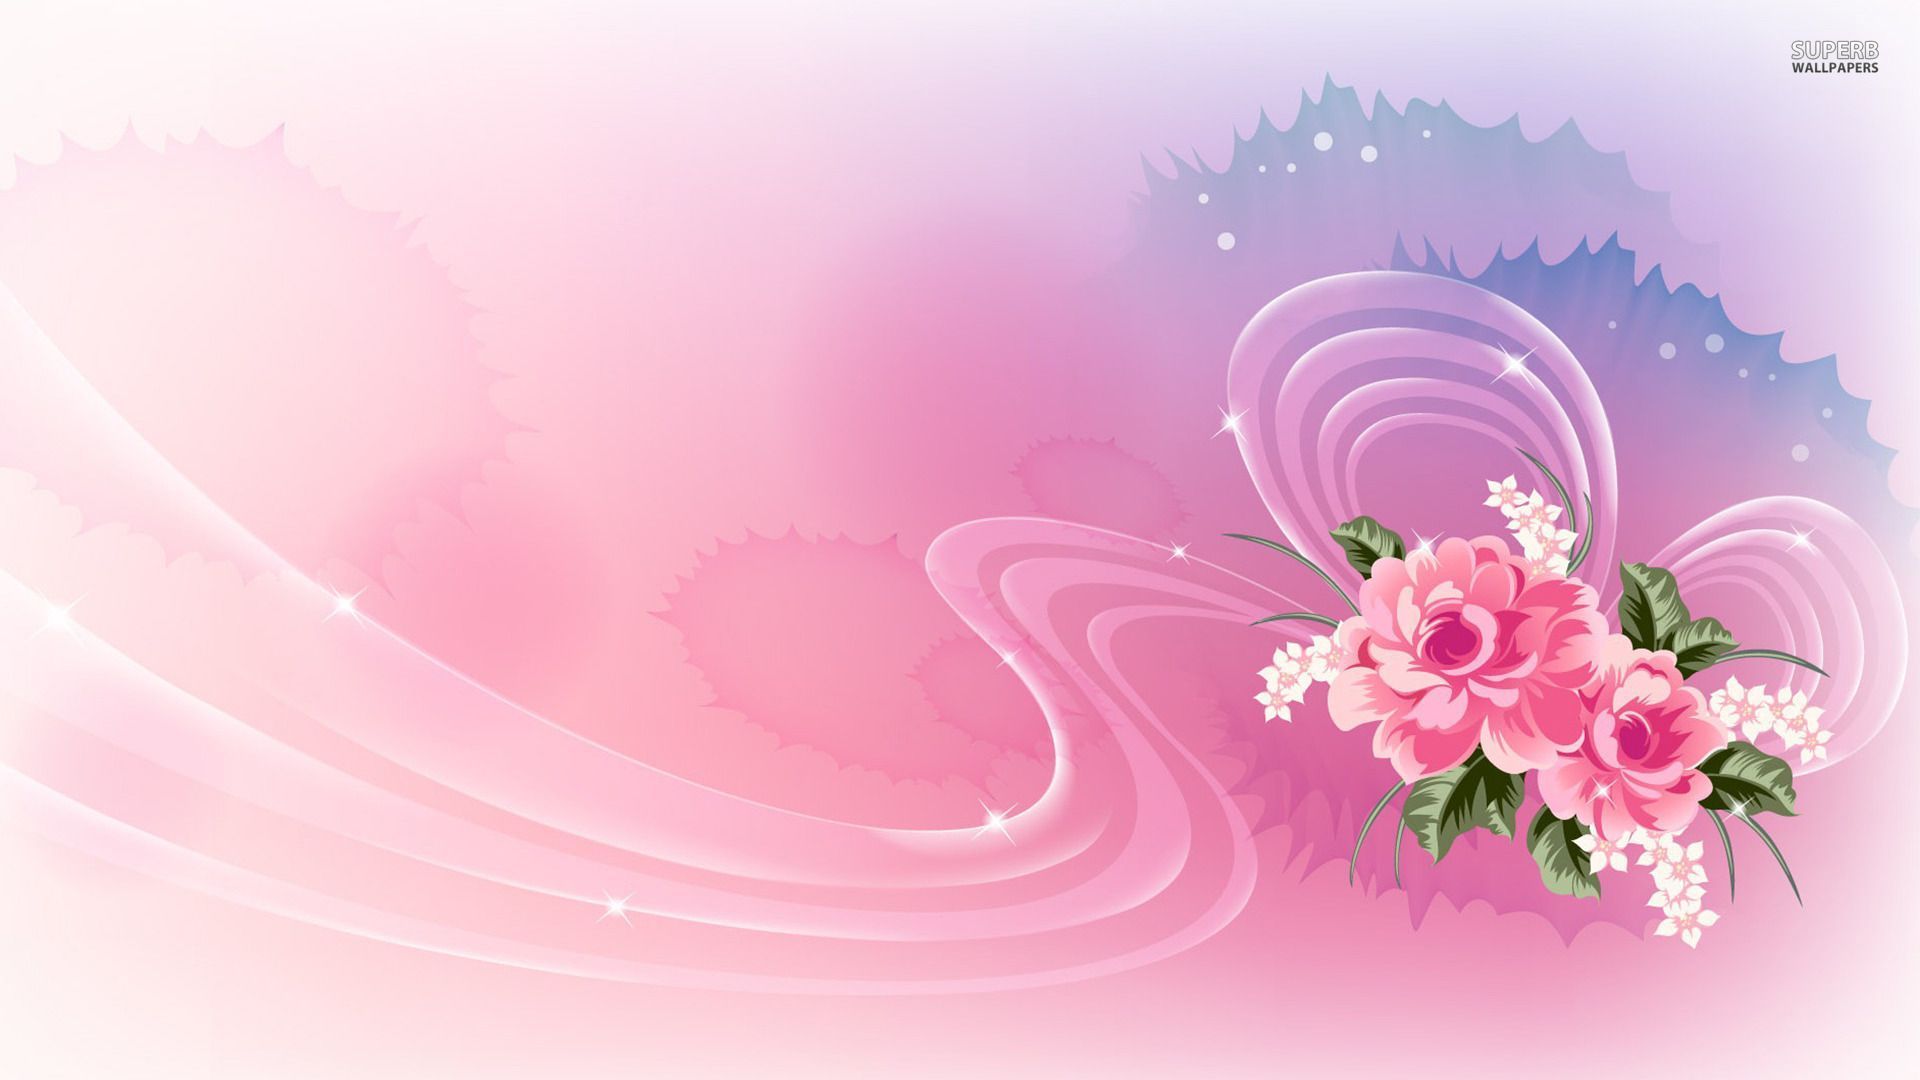 Pink roses on translucent ribbon wallpaper - Artistic wallpapers ...